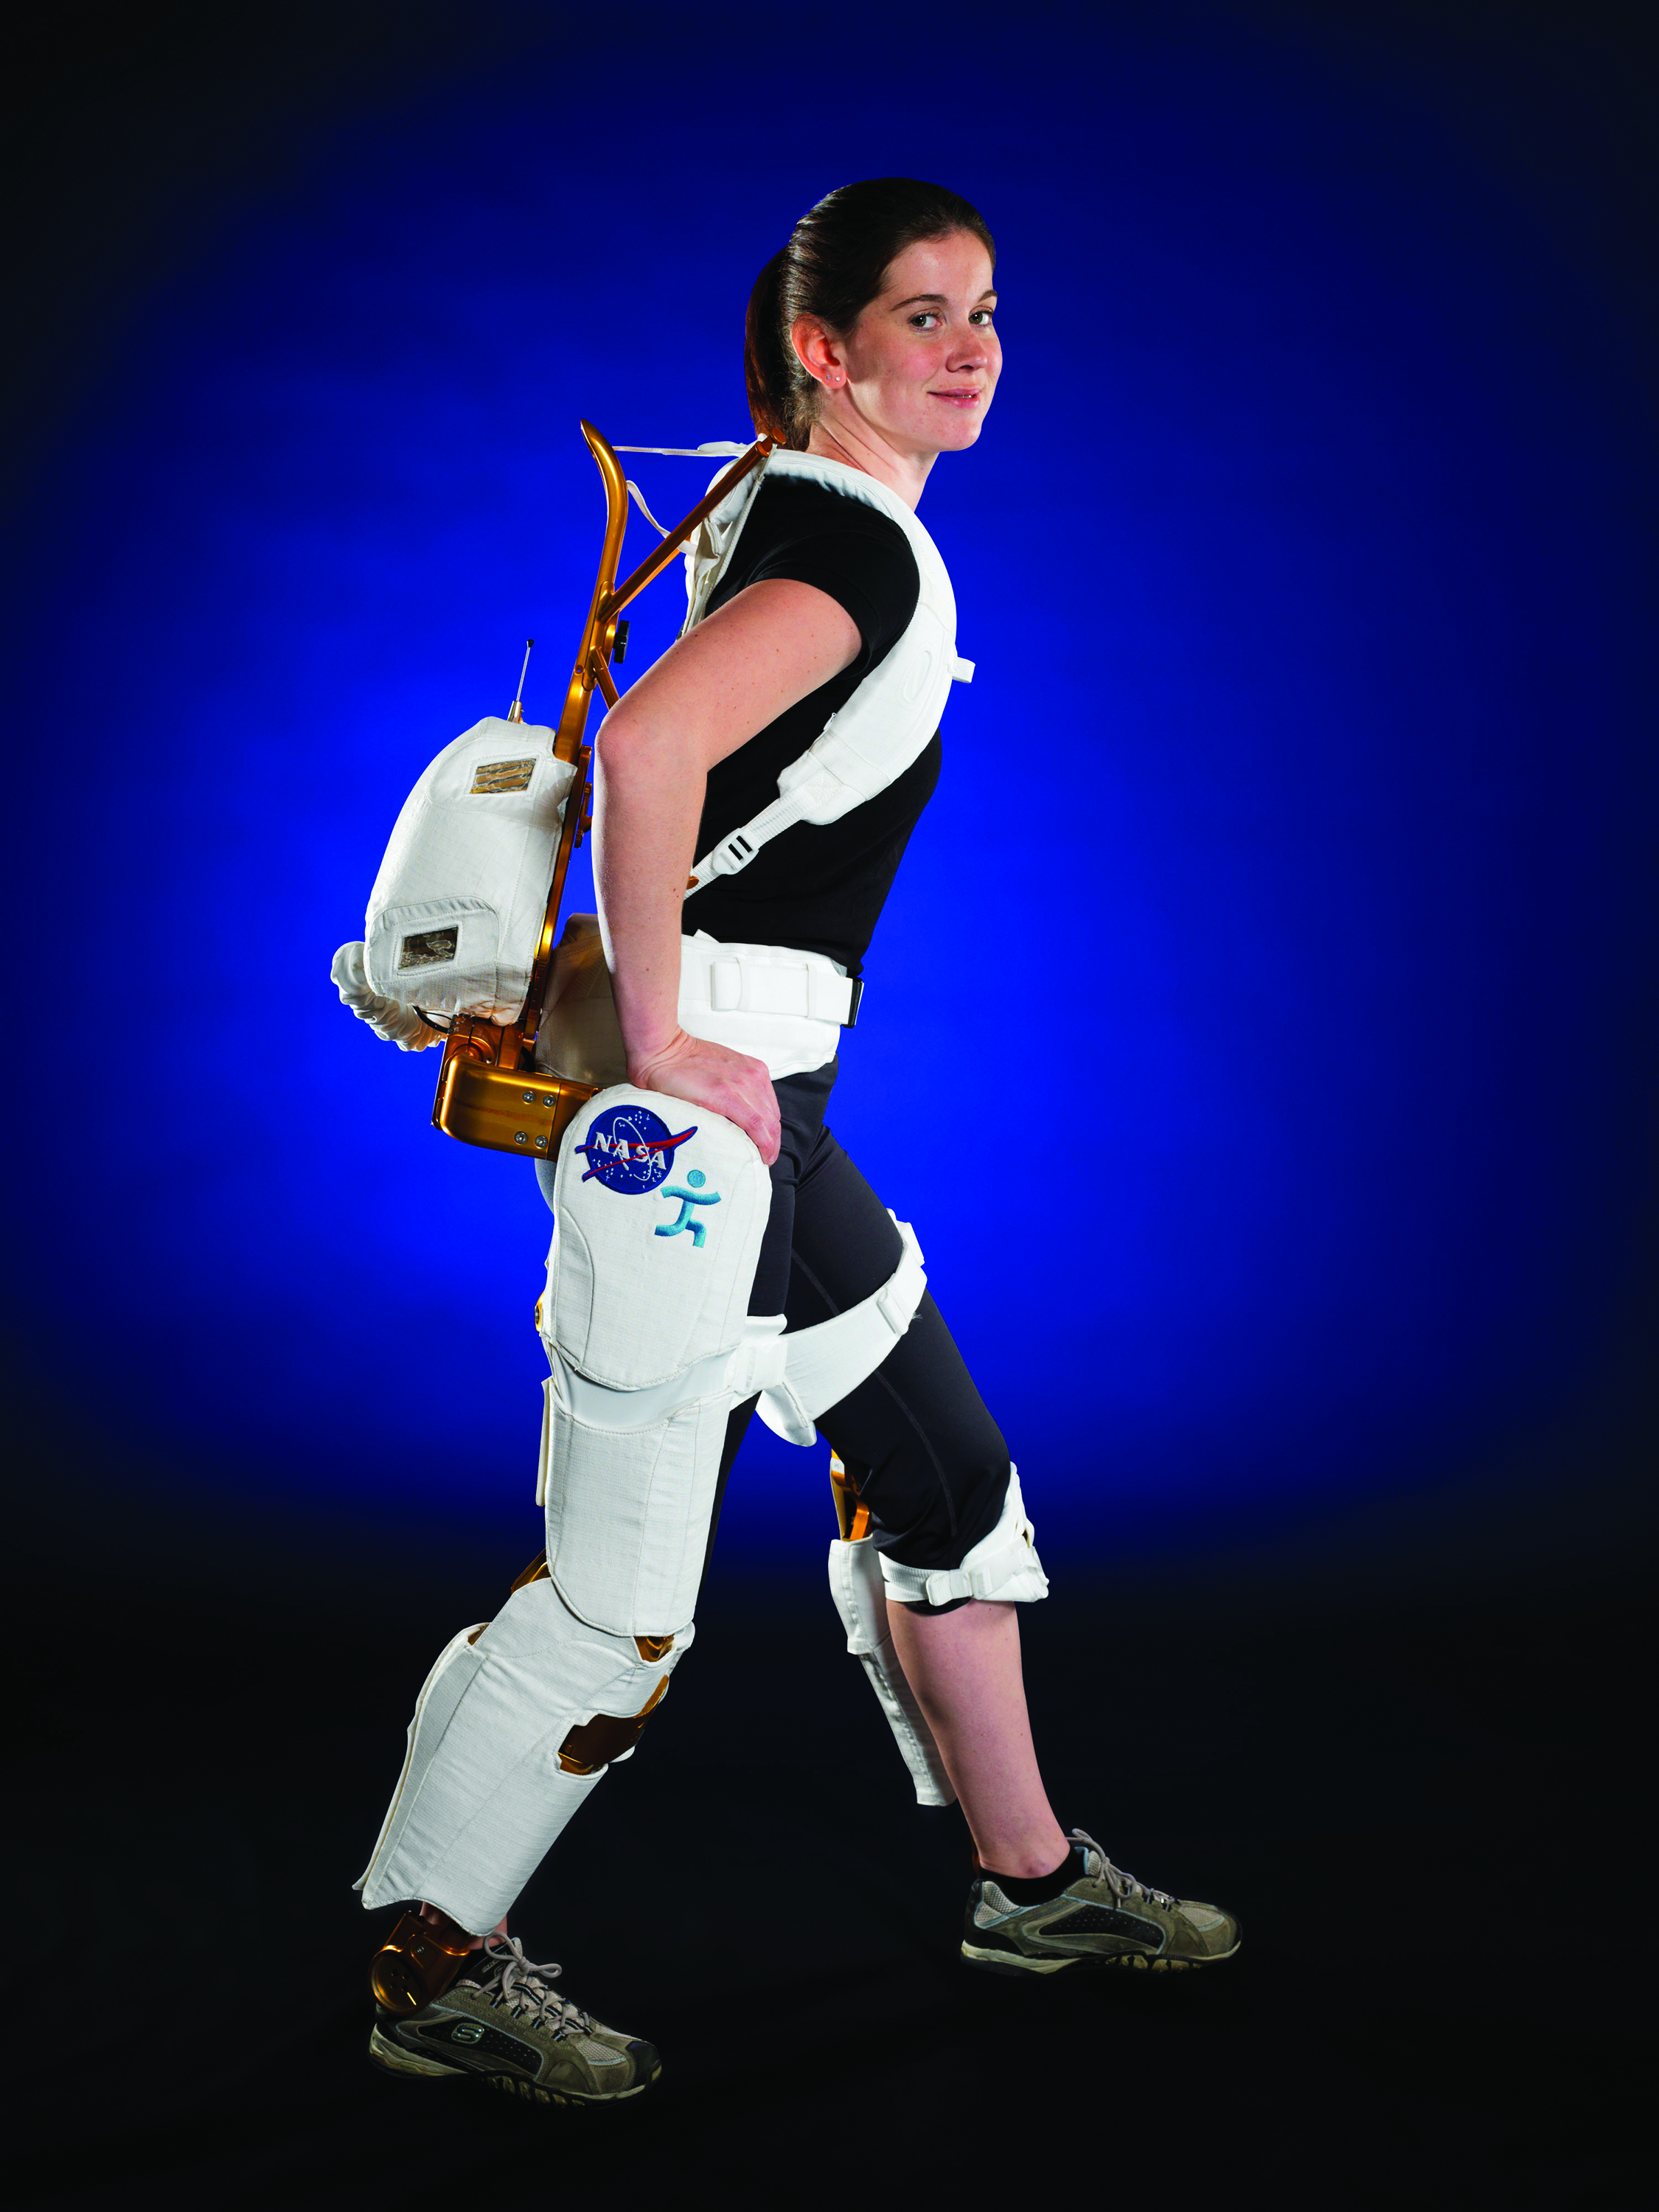 NASA Project Engineer Shelley Rea wears robotic leg harness as demonstration, which is mean for use by human paraplegics in spac